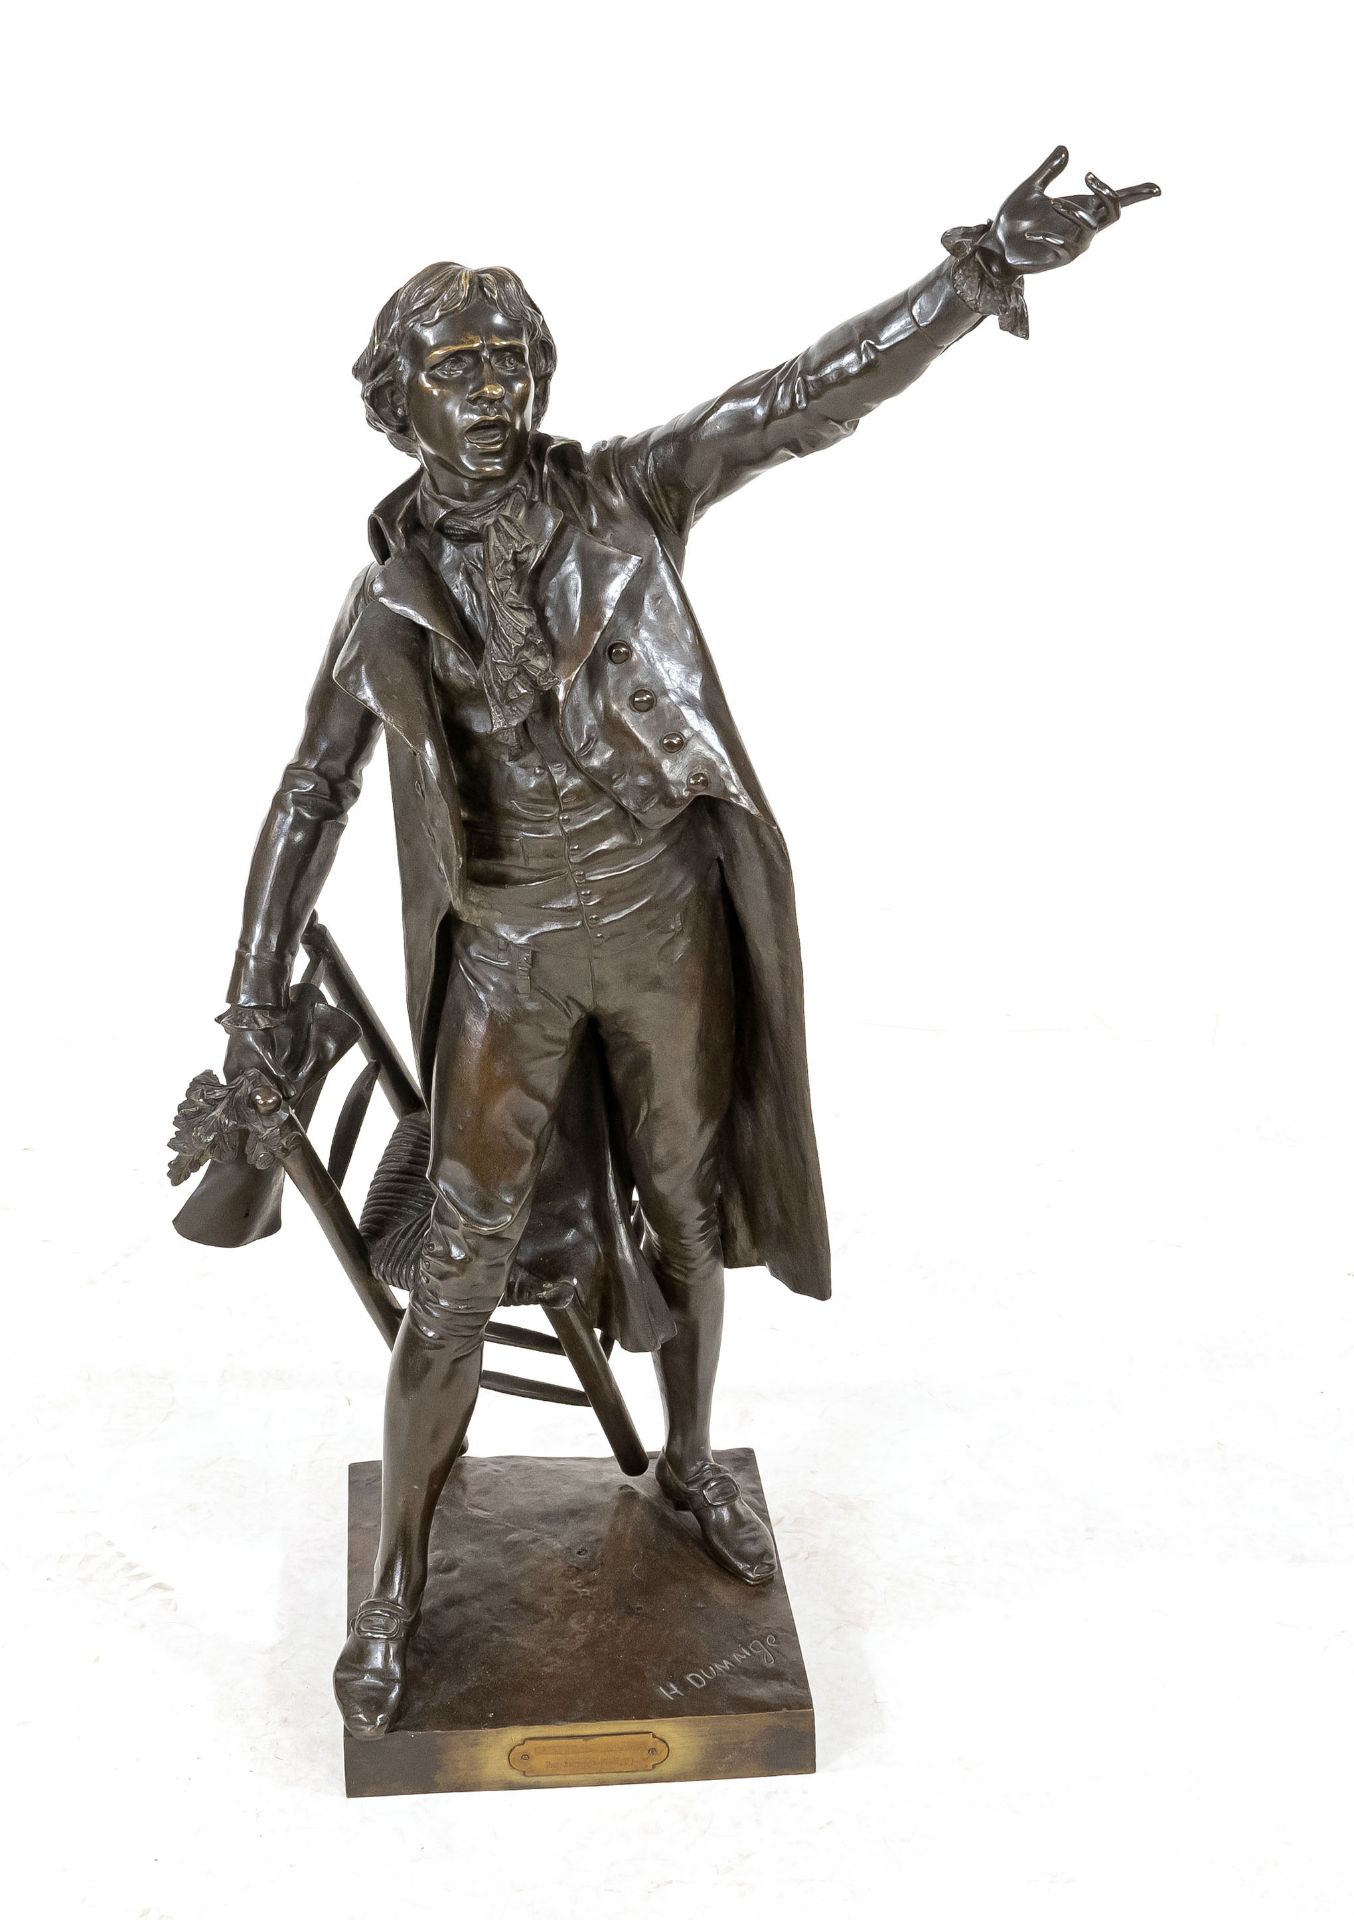 Henry Etienne Dumaige (1830-1888), large bronze sculpture of the French lawyer and revolutionary